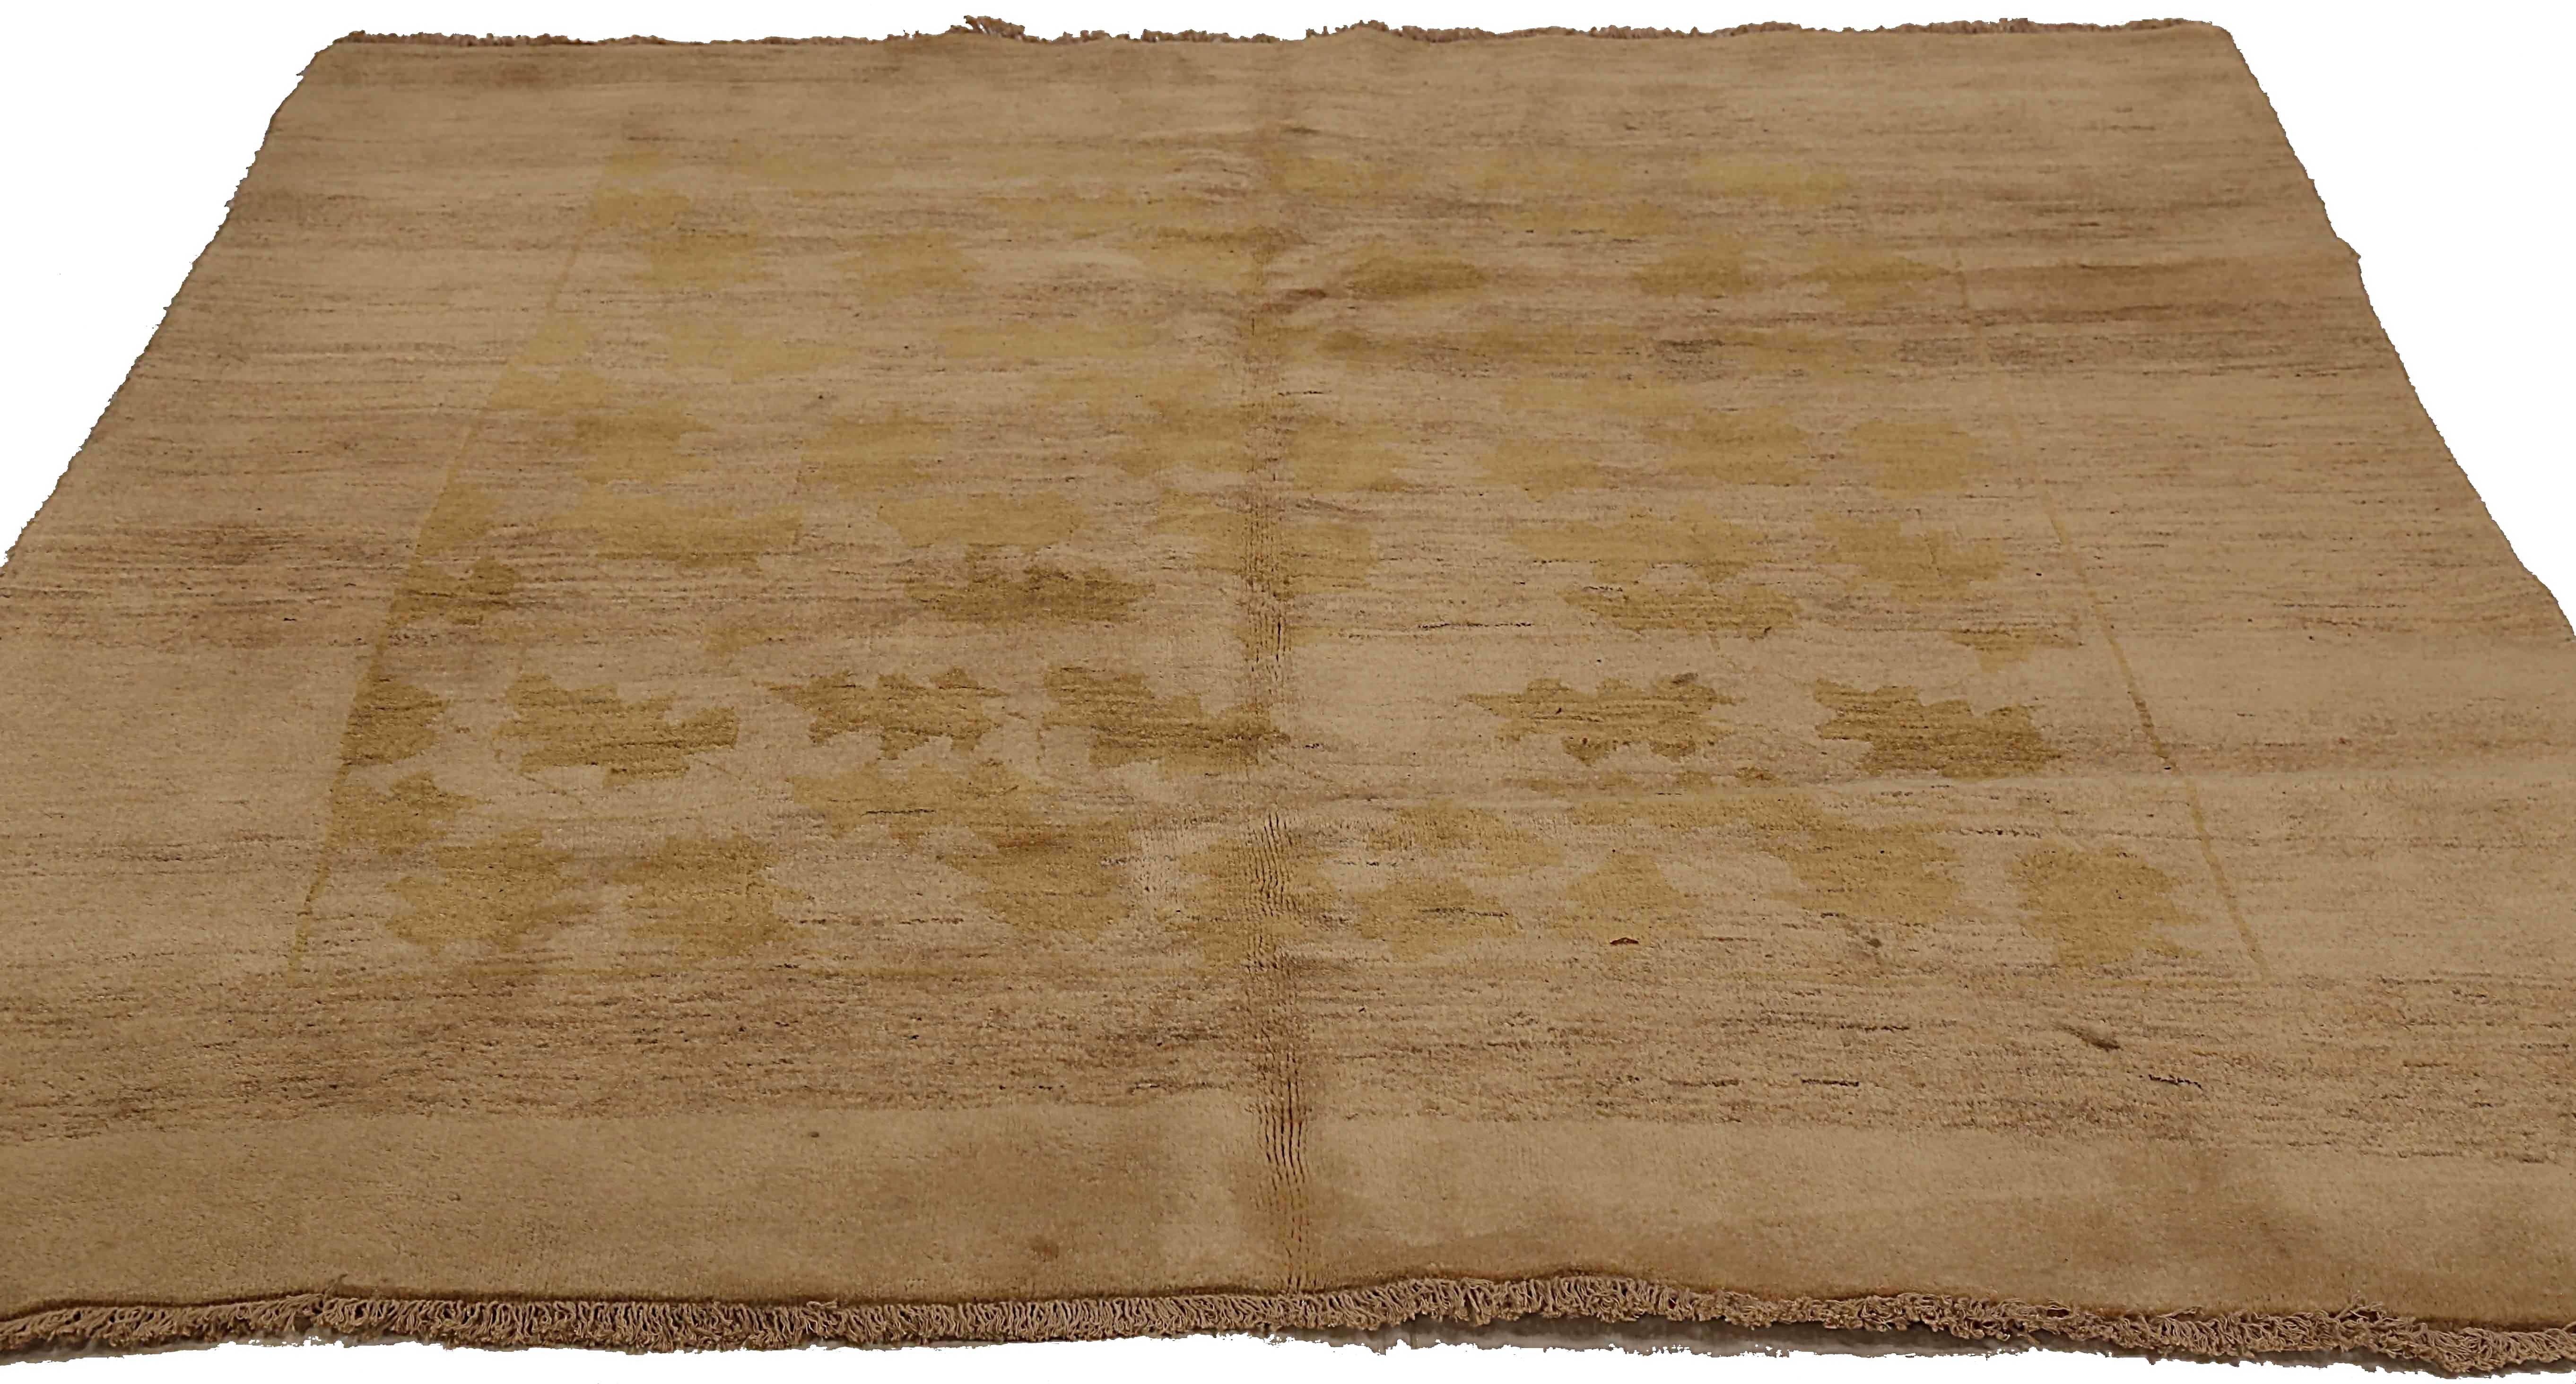 Antique Persian square rug handwoven from the finest sheep’s wool. It’s colored with all-natural vegetable dyes that are safe for humans and pets. It’s a traditional Gabbeh design handwoven by expert artisans. It’s a lovely square rug that can be